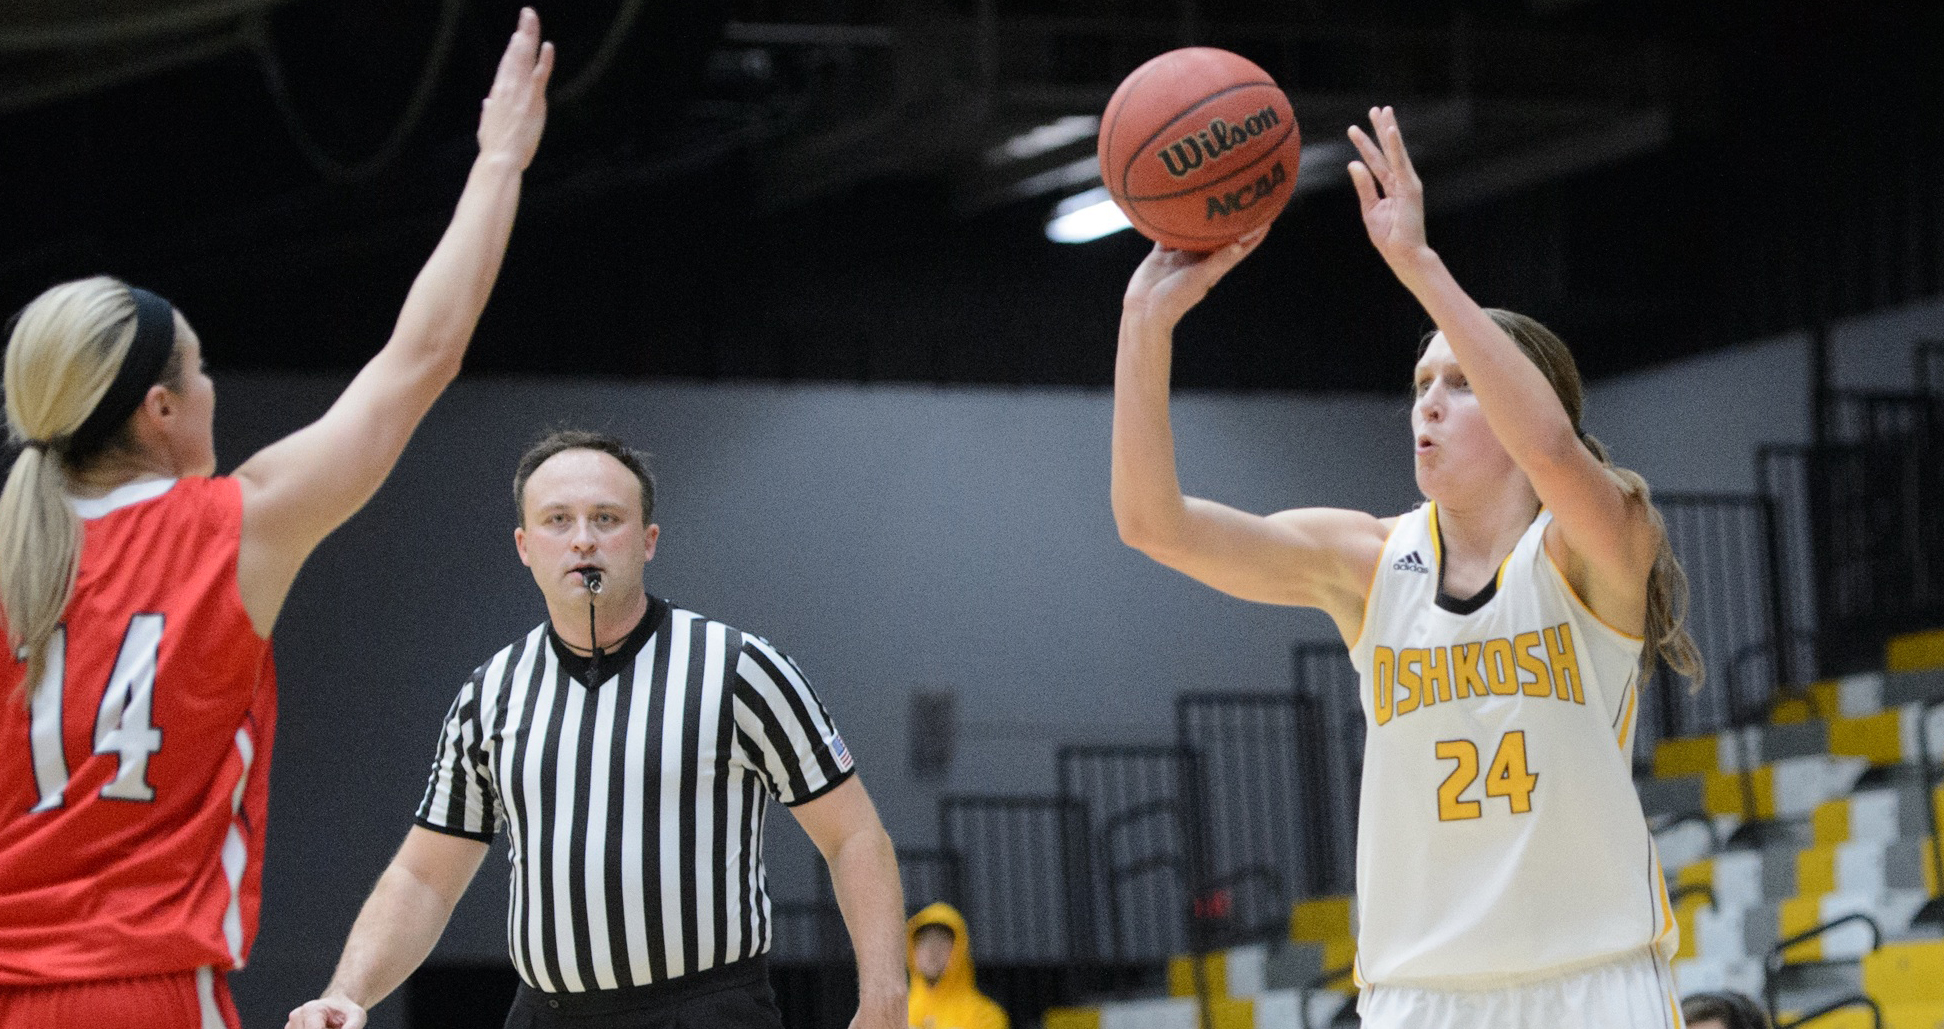 Eliza Campbell scored 13 points against the Falcons, including three 3-point baskets.